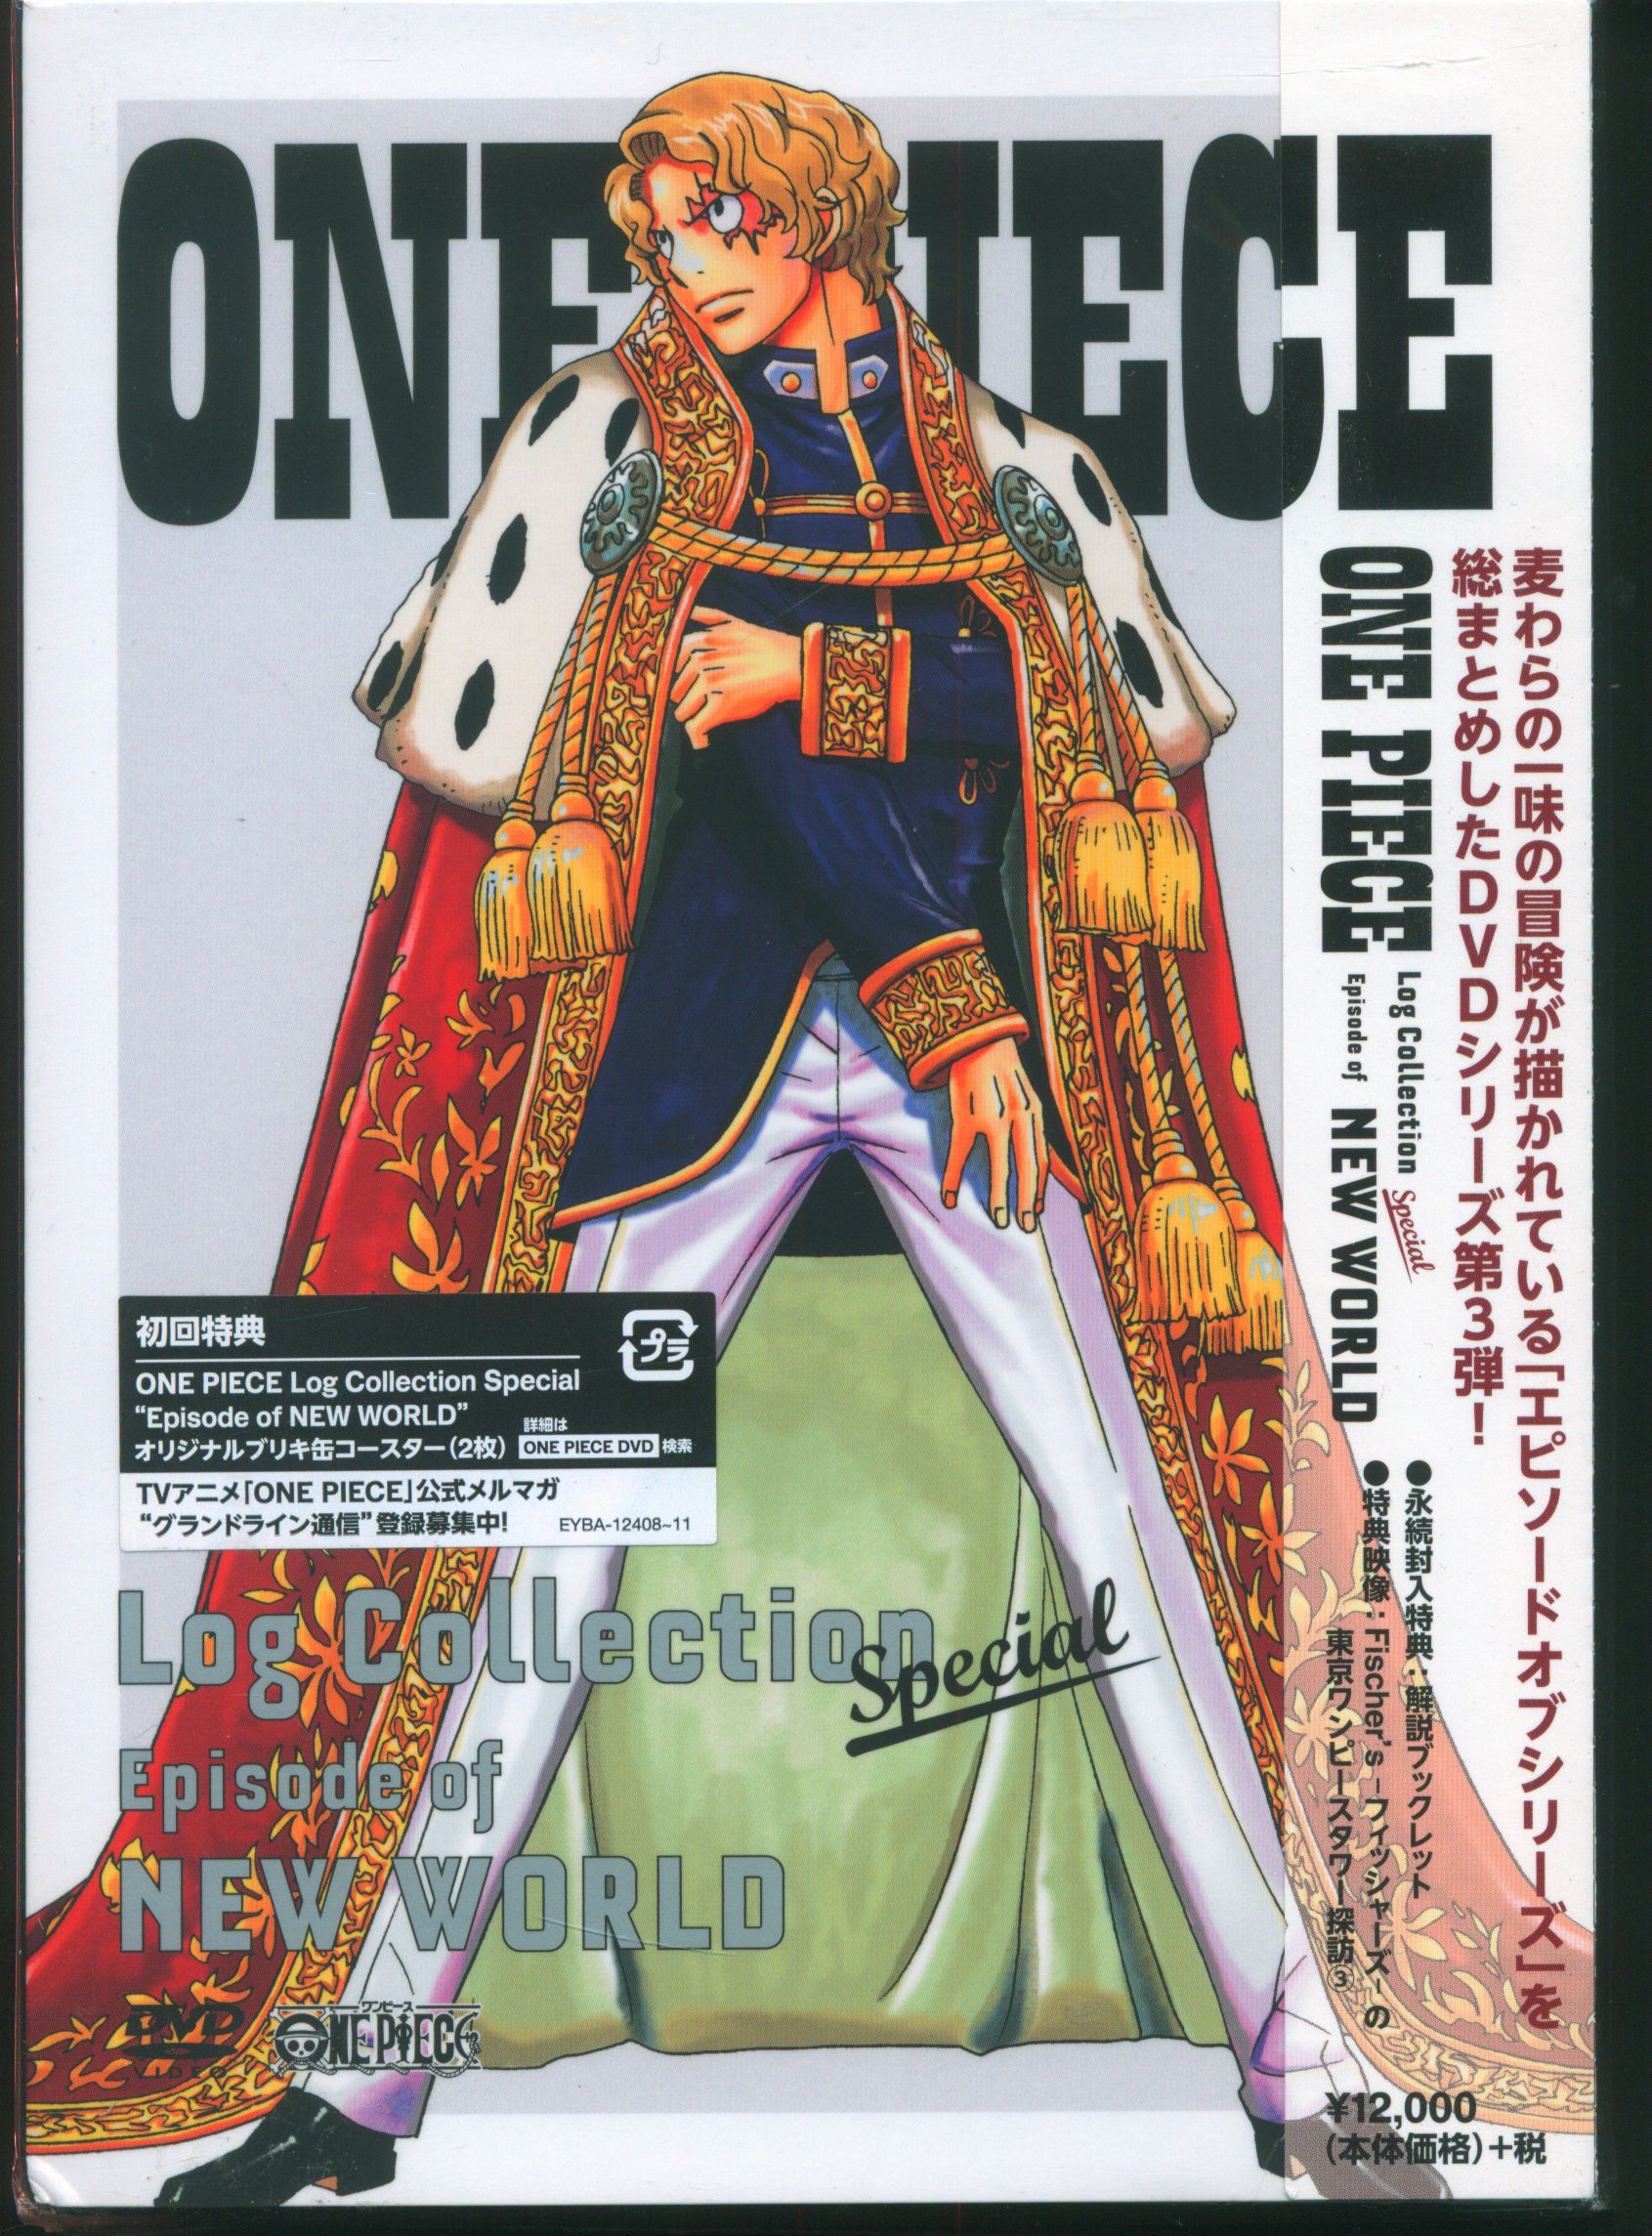 One Piece - Collection 11 - DVD